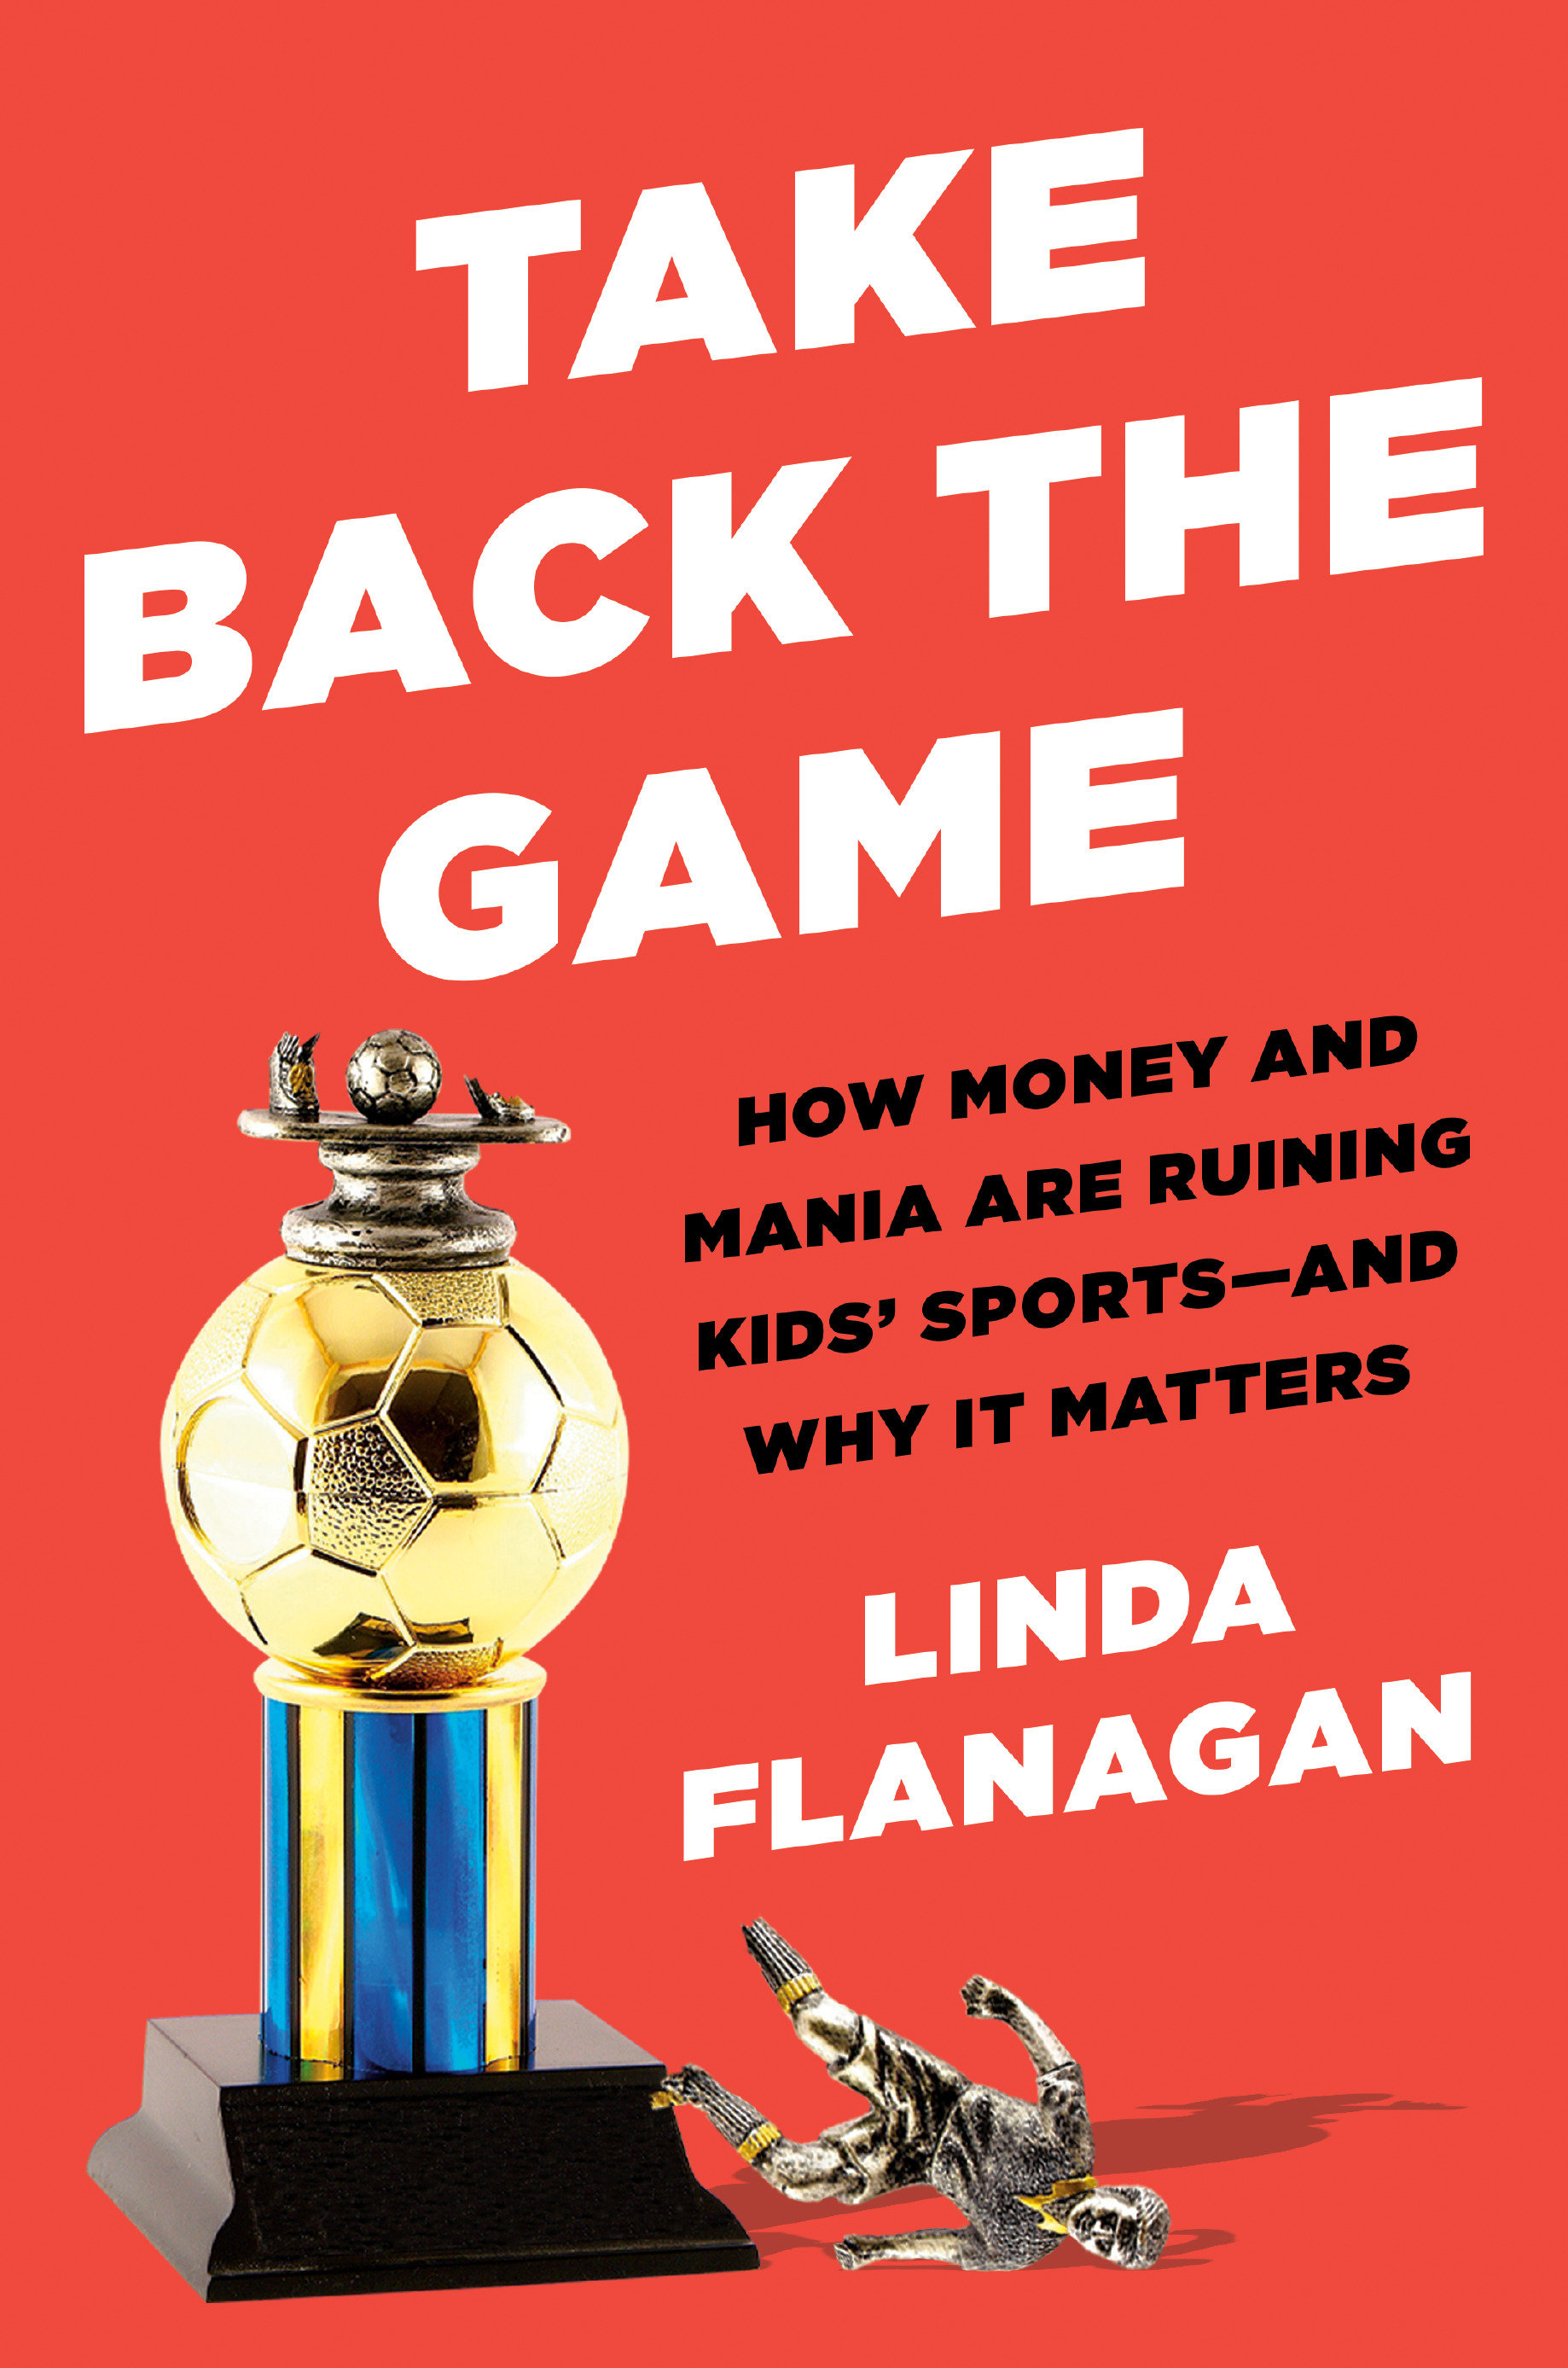 Take Back The Game (Hardcover Book)